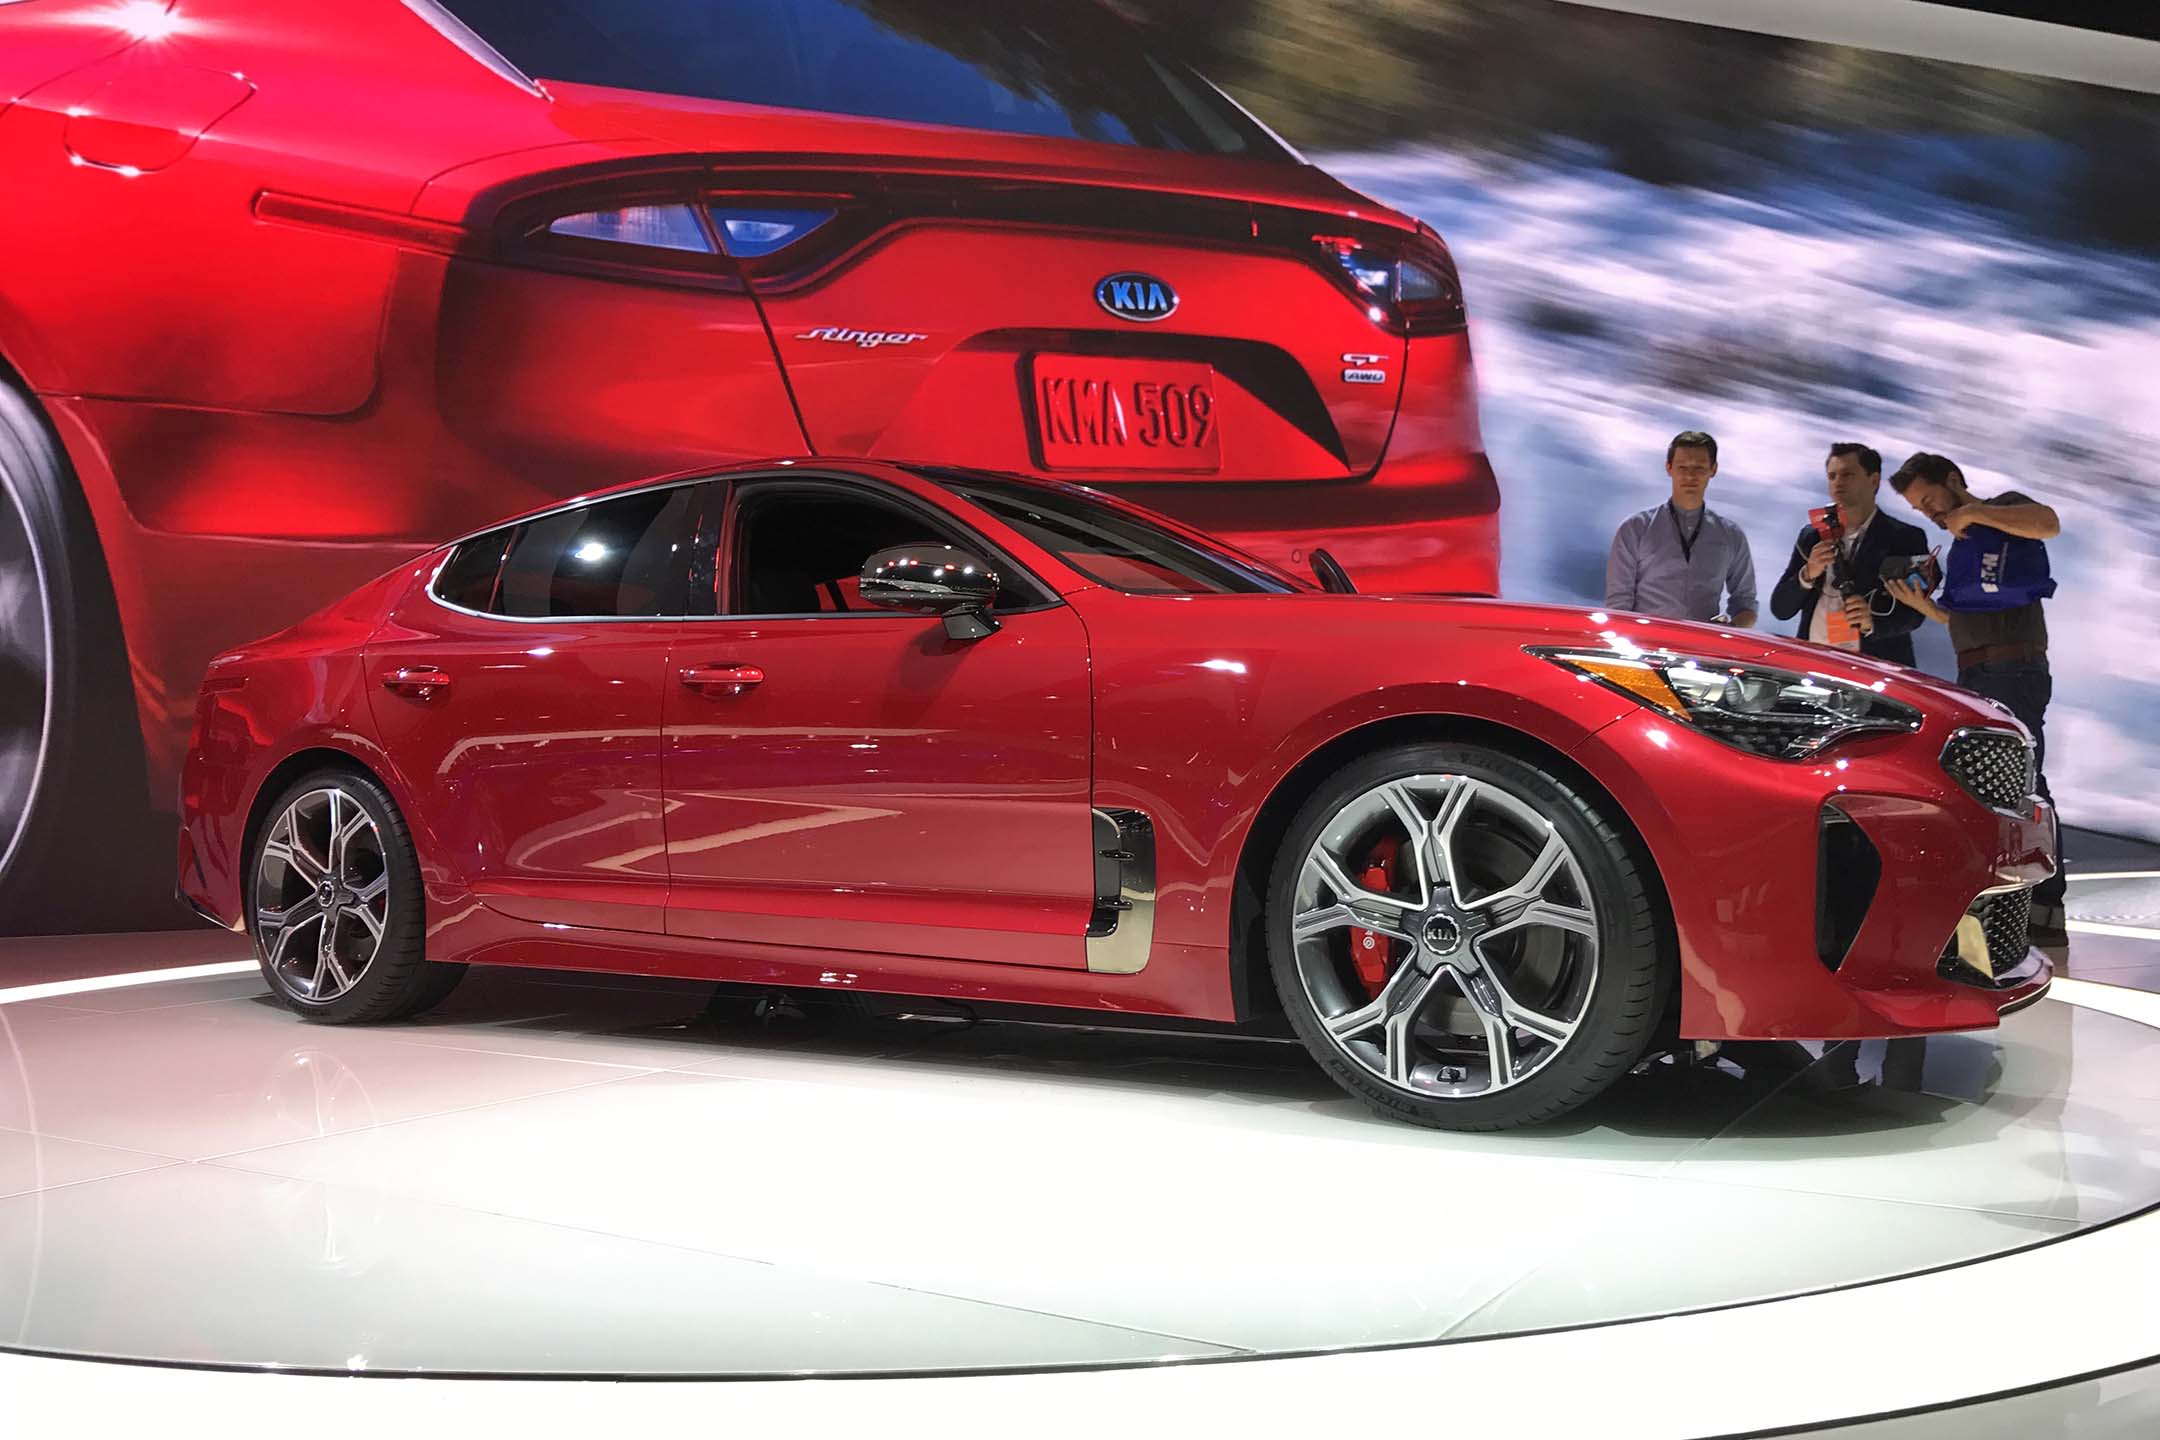 Benjamin Hunting: The Kia Stinger proves that resting on your laurels is never safe in the sport sedan world – and that Kia still cares about actual drivers when so many others are focusing on robots behind the wheel.